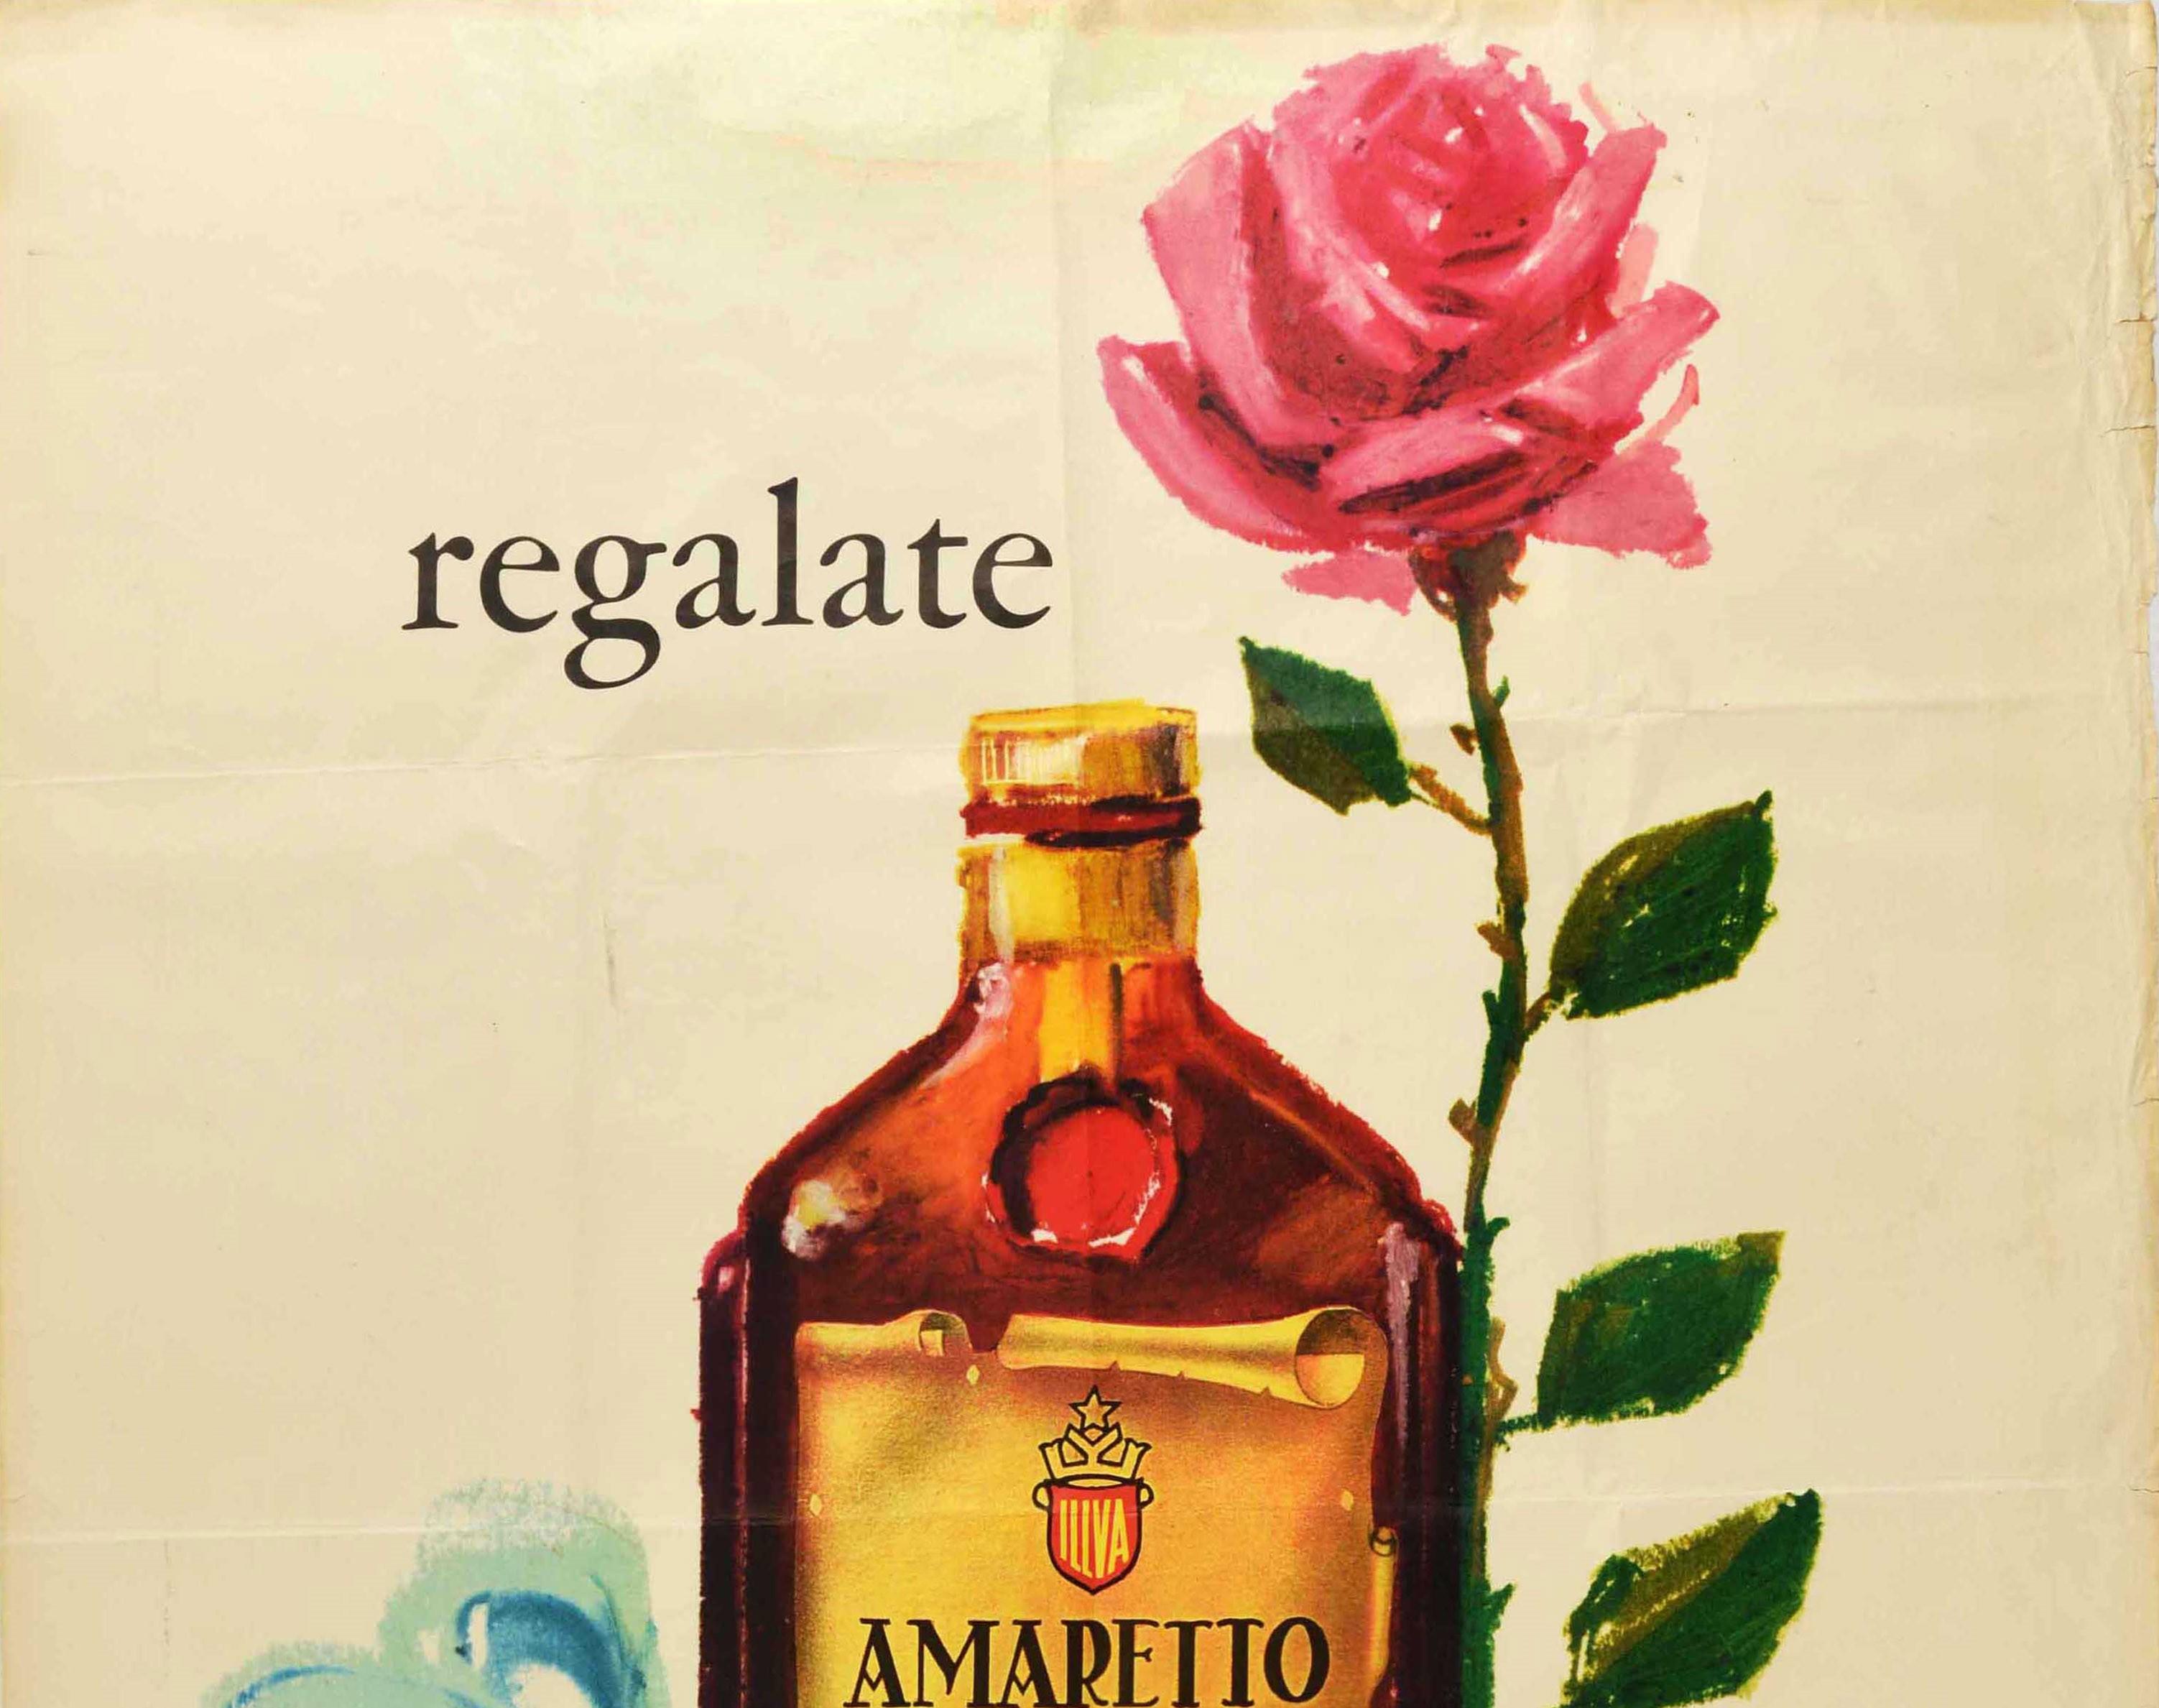 Original vintage Italian drink advertising poster for Amaretto di Saronno featuring an illustration of a square Murano designed glass bottle of the liqueur with a rose flower tied to the side with a blue gift ribbon and the text above and below -